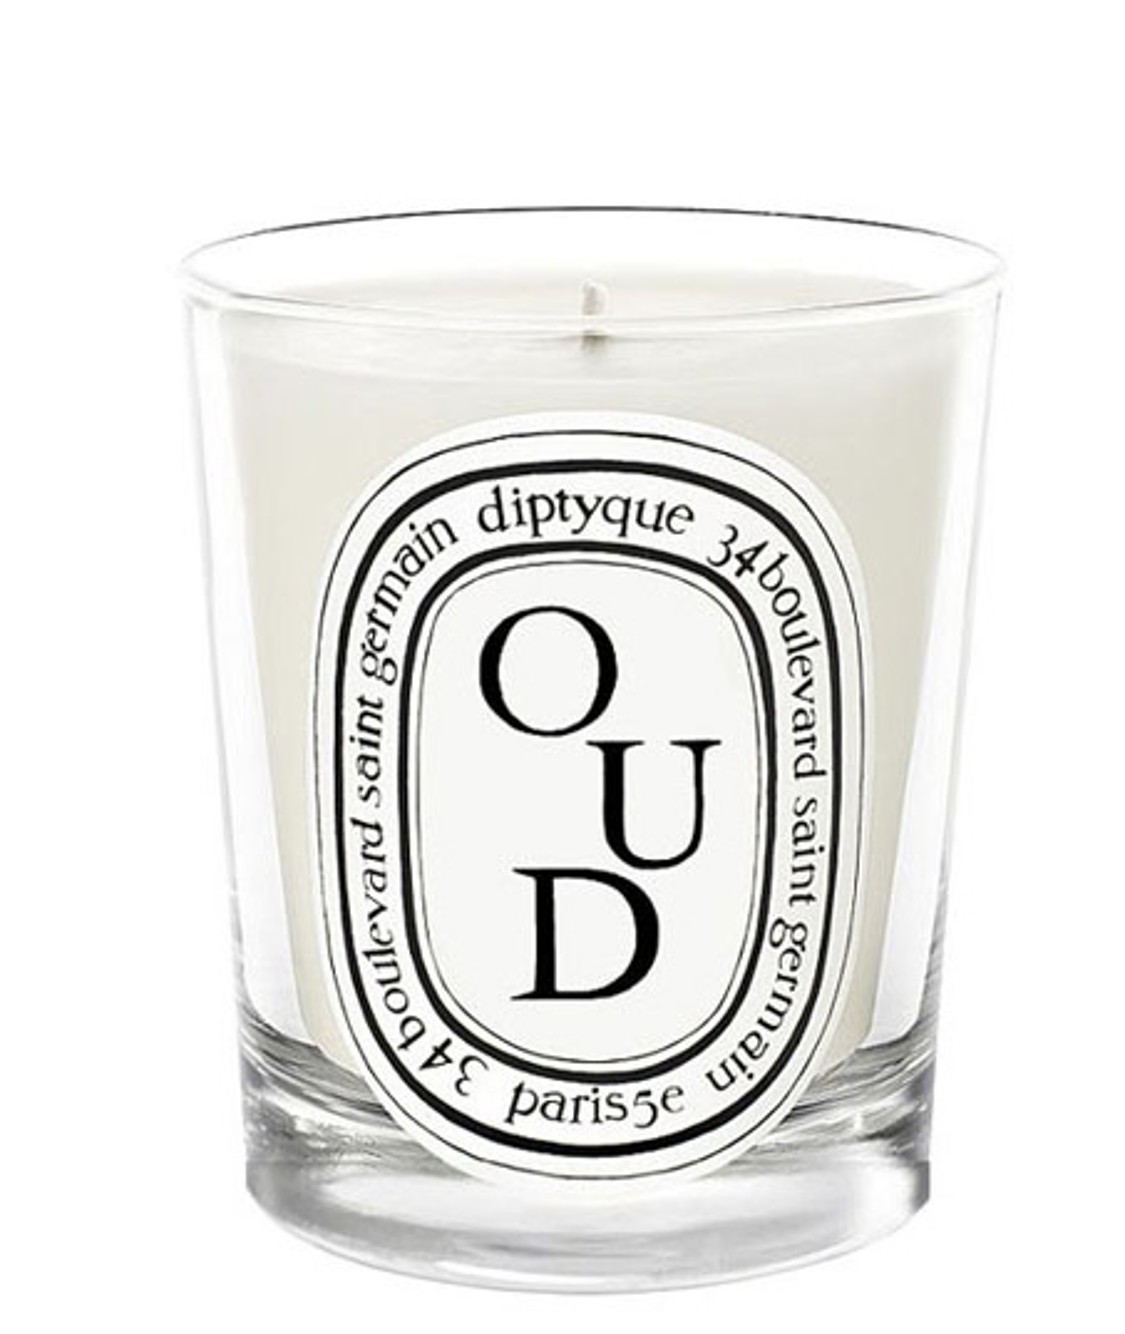 shop Diptyque  Candle: Candle Diptyque, Oud, 190 gr, a base of oud, it is a particular resin from an Indian tree. number 1812